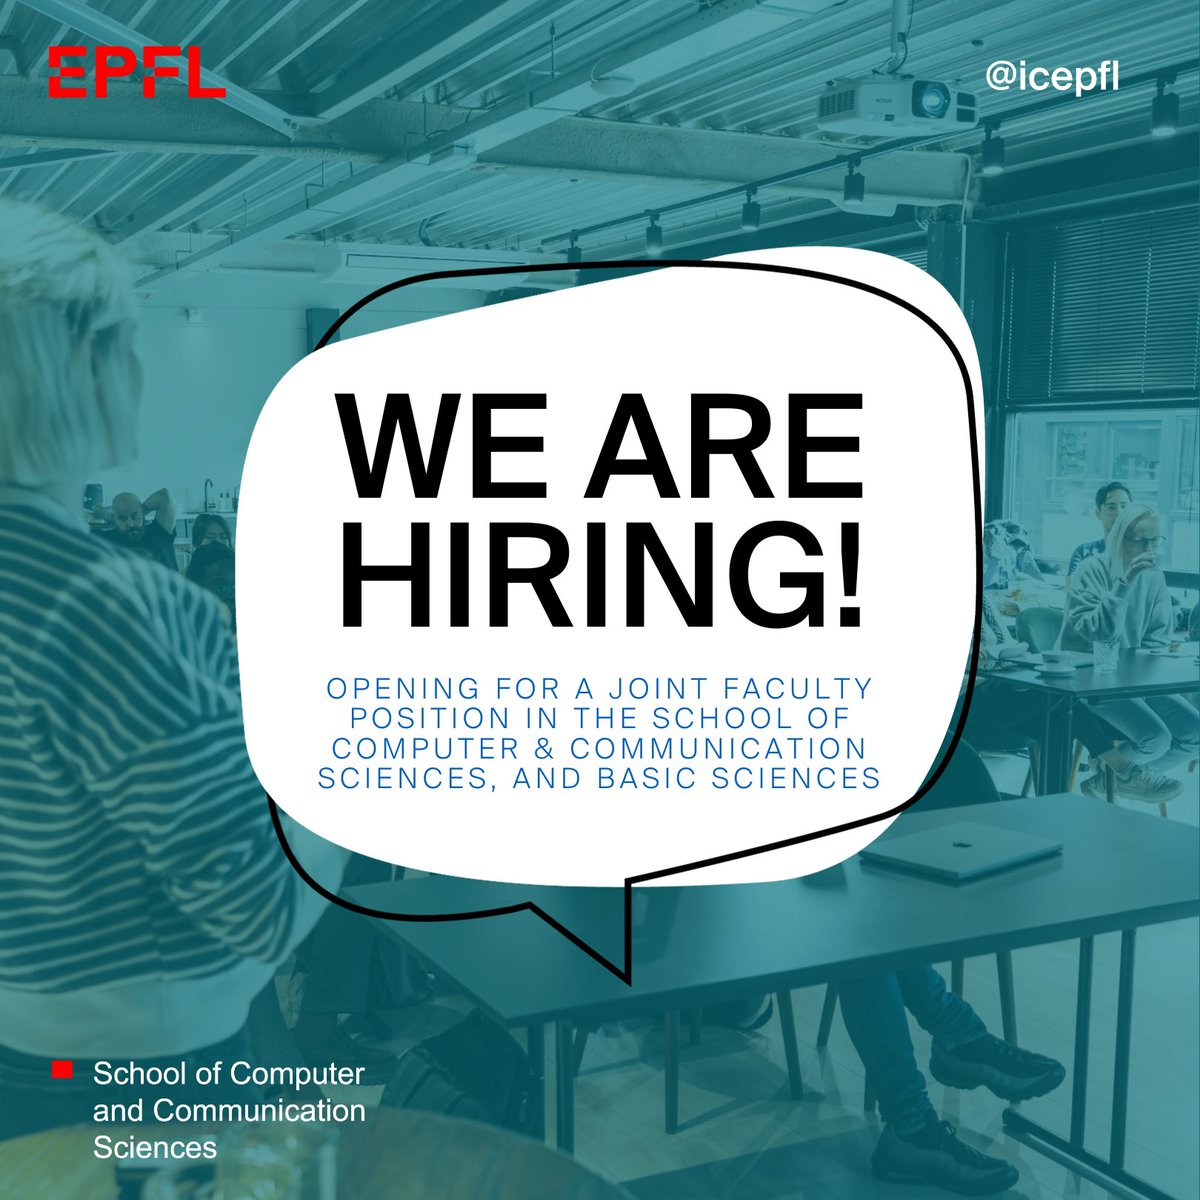 [#JobAlert] 💻
Join the EPFL Schools of Computer and Communication Sciences (IC) and Basic Sciences (SB) for a joint faculty position in all areas of #quantumcomputing and #quantumalgorithms. Position open at Assistant Professor level. 👩‍💻
Find out more  👉🏼
epfl.ch/about/working/…